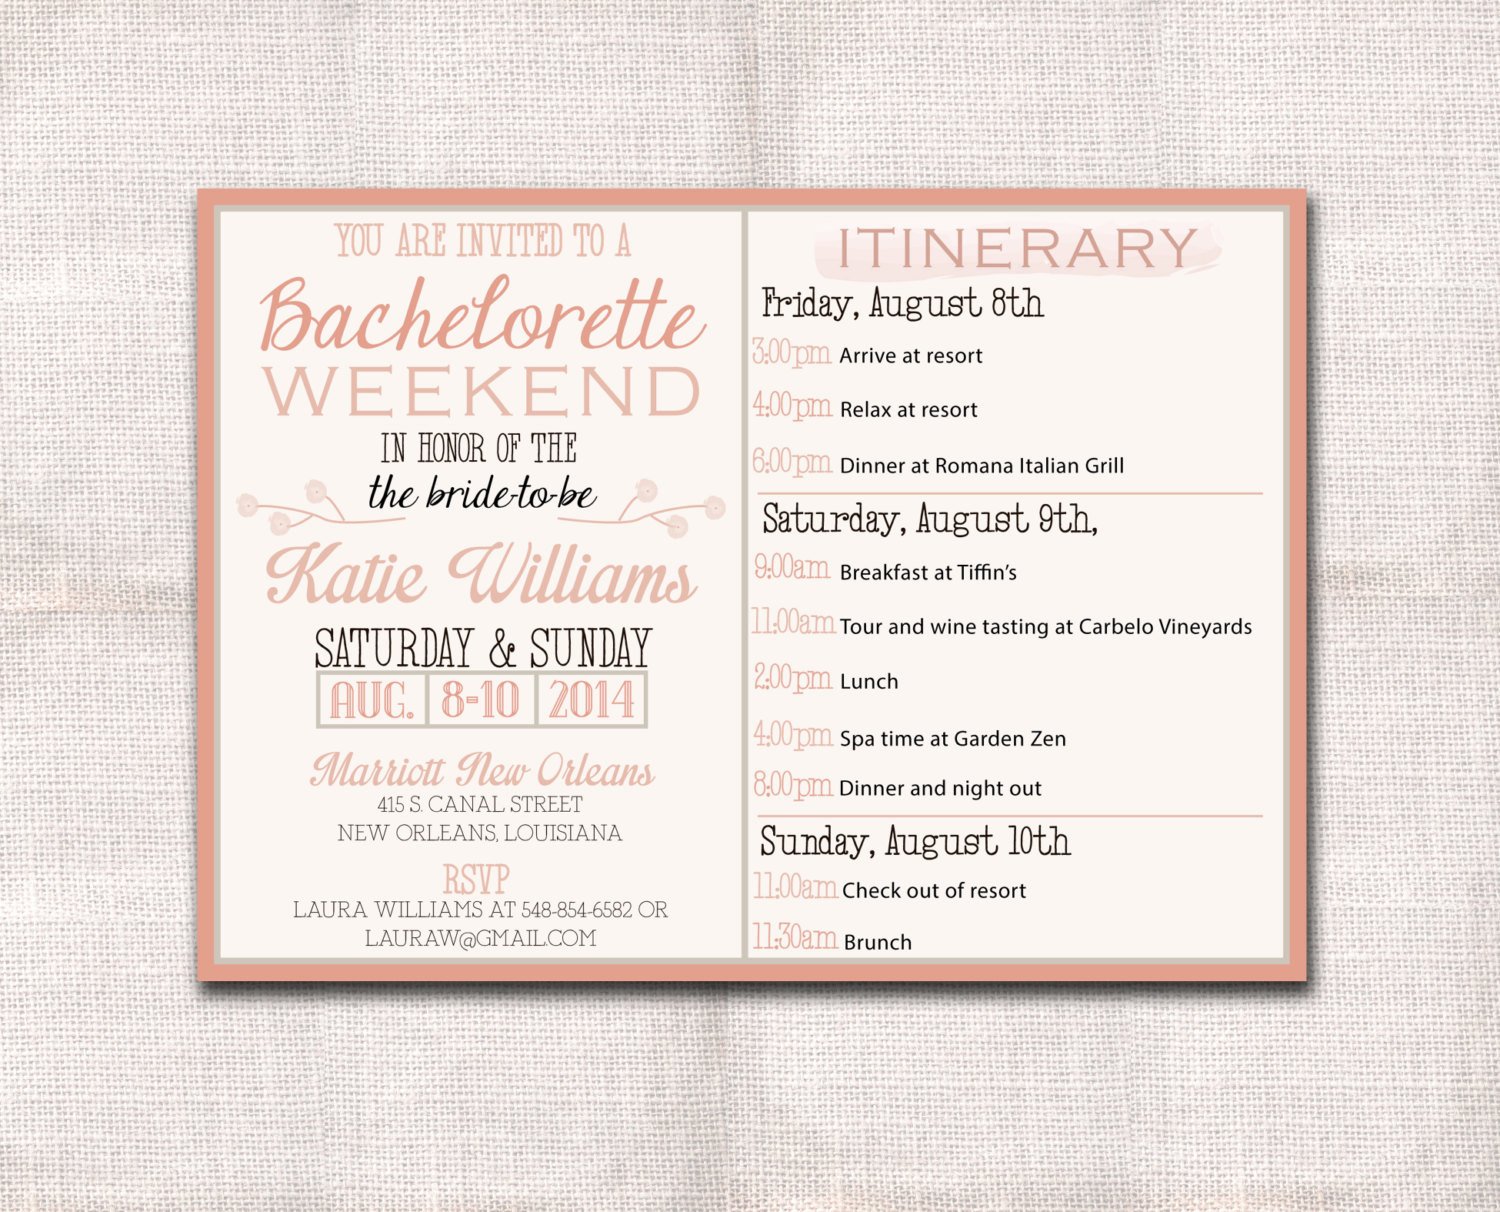 Bachelorette Itinerary Template Free New Bachelorette Party Weekend Invitation and Itinerary Custom